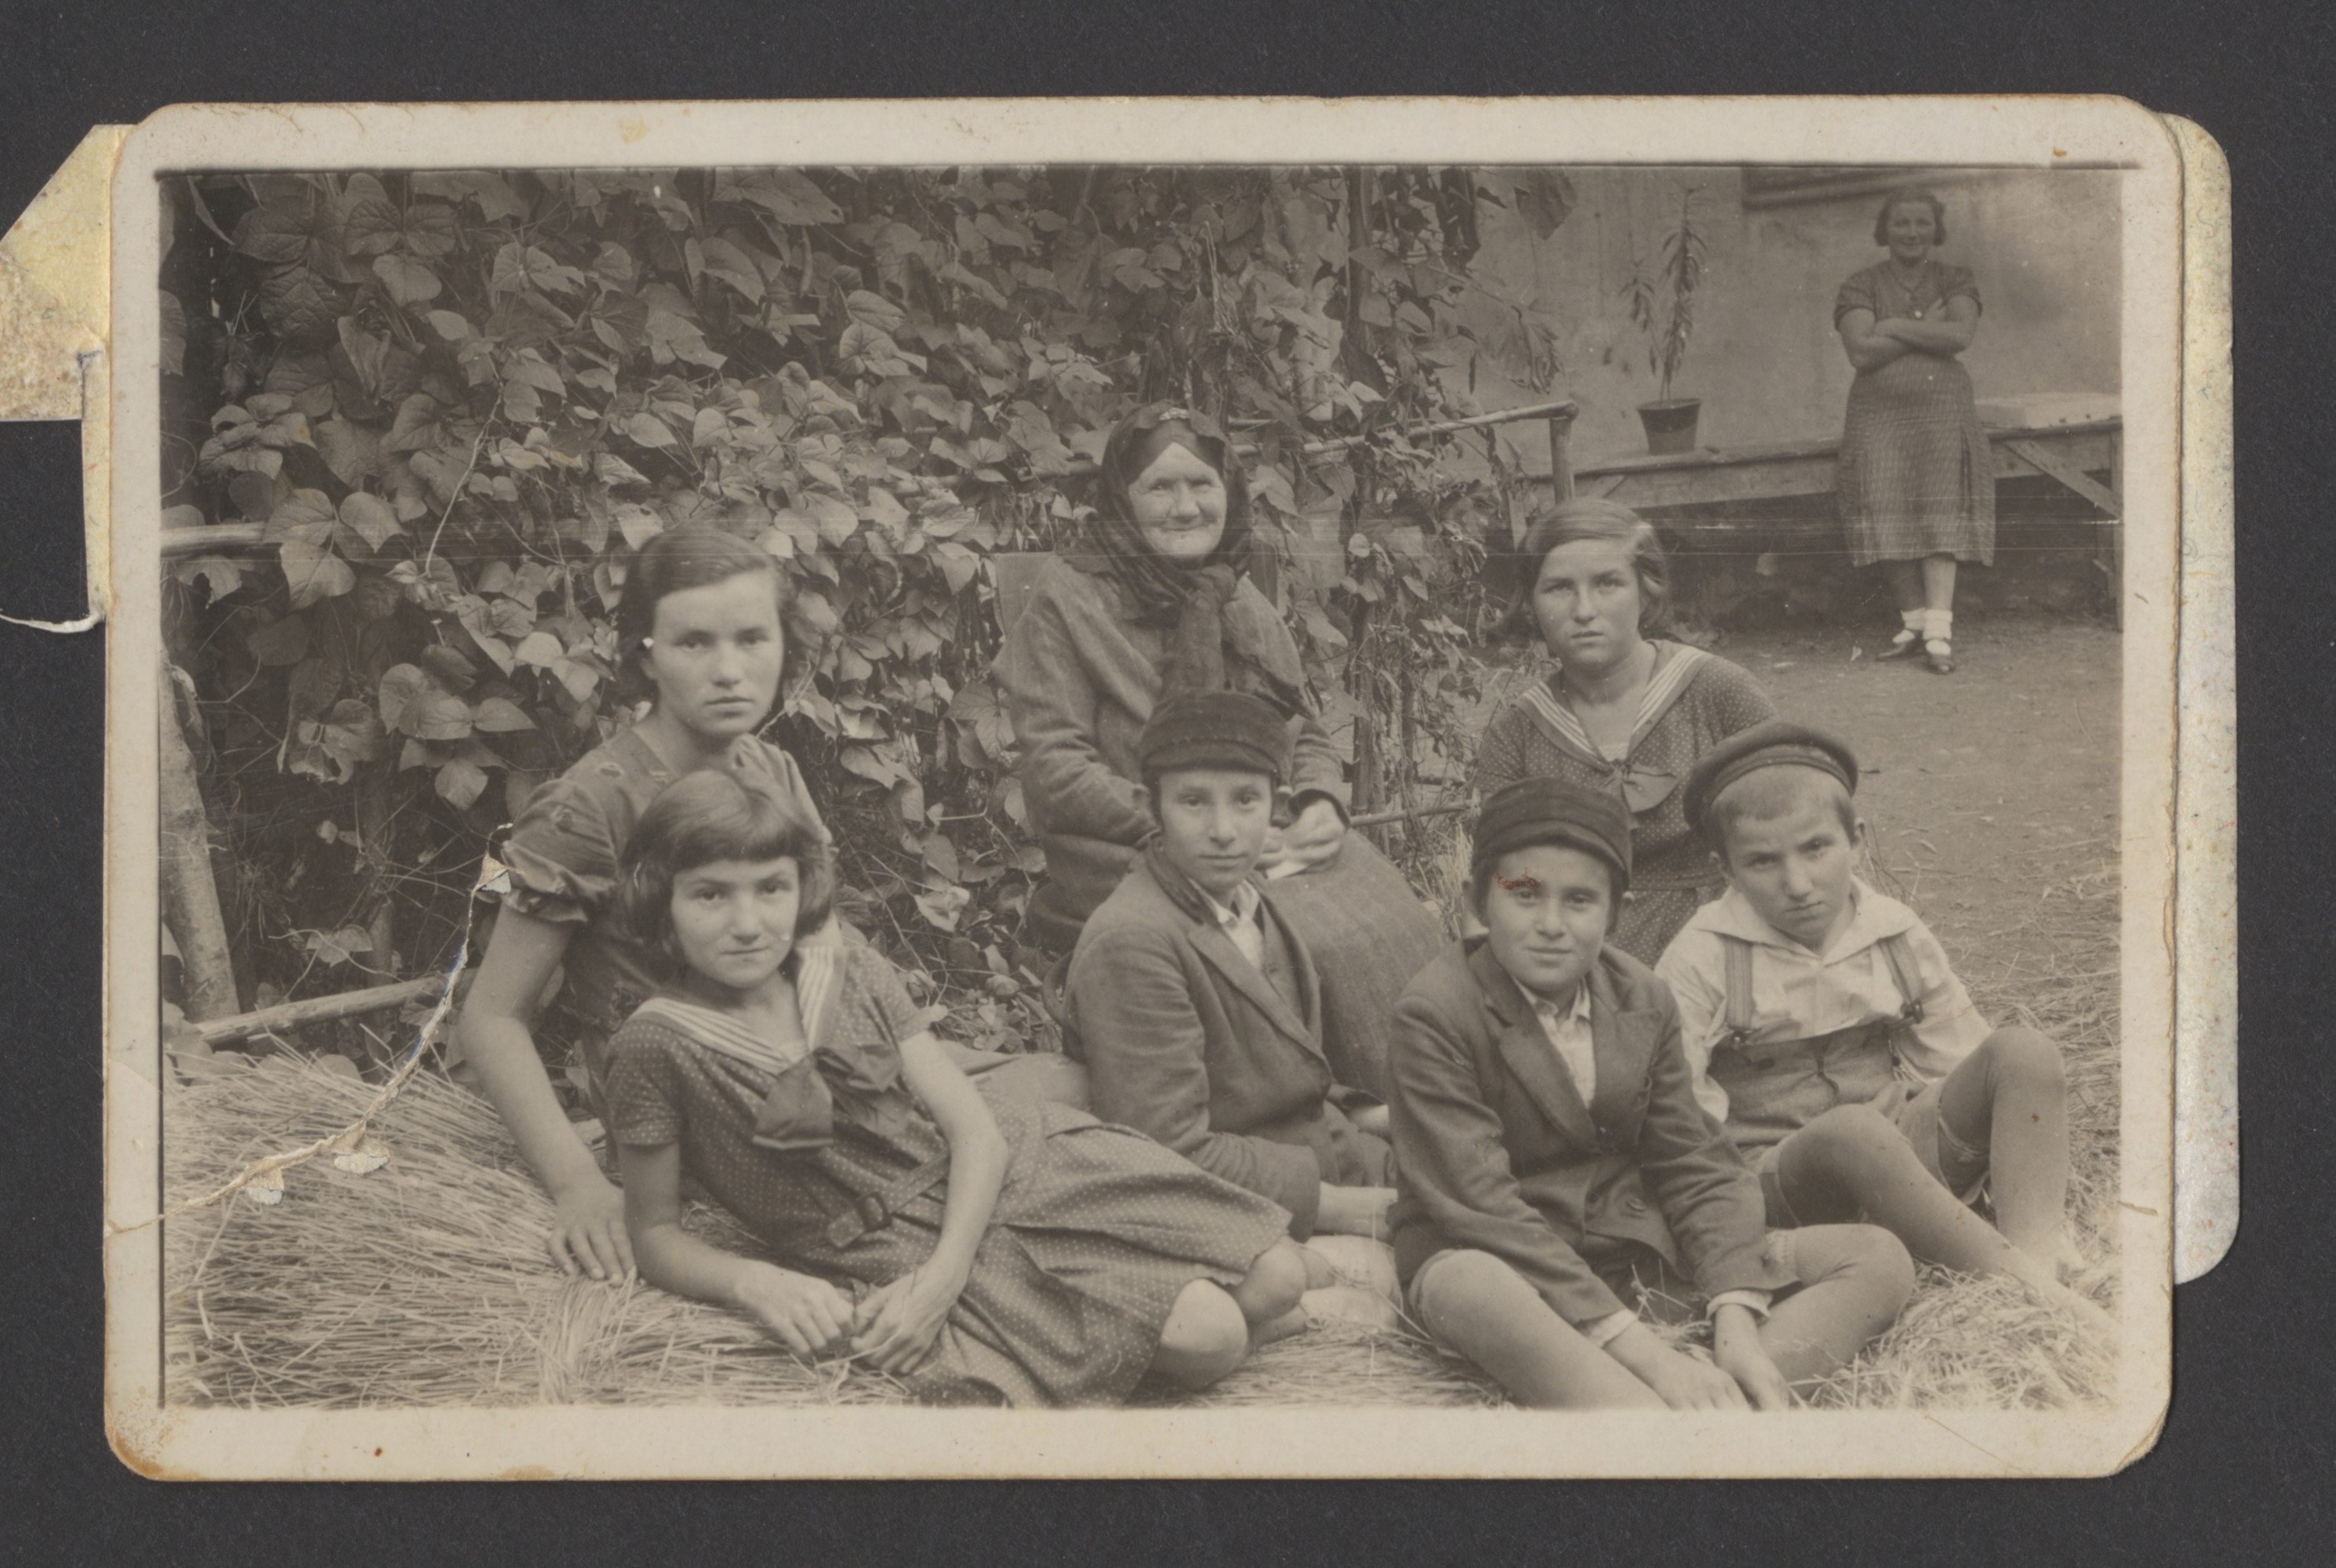 A Polish Jewish family gathers for a photograph in the backyard of their home in Nowy Sacz.

Pictured is Miriam Ullman (back, center) with her grandchildren:  siblings Blima (far left), Moishe (center), and Mayer Spiro (front, second from the right); and siblings Sally and Deborah (wearing sailor dresses), and Yoel Ullman (far right).